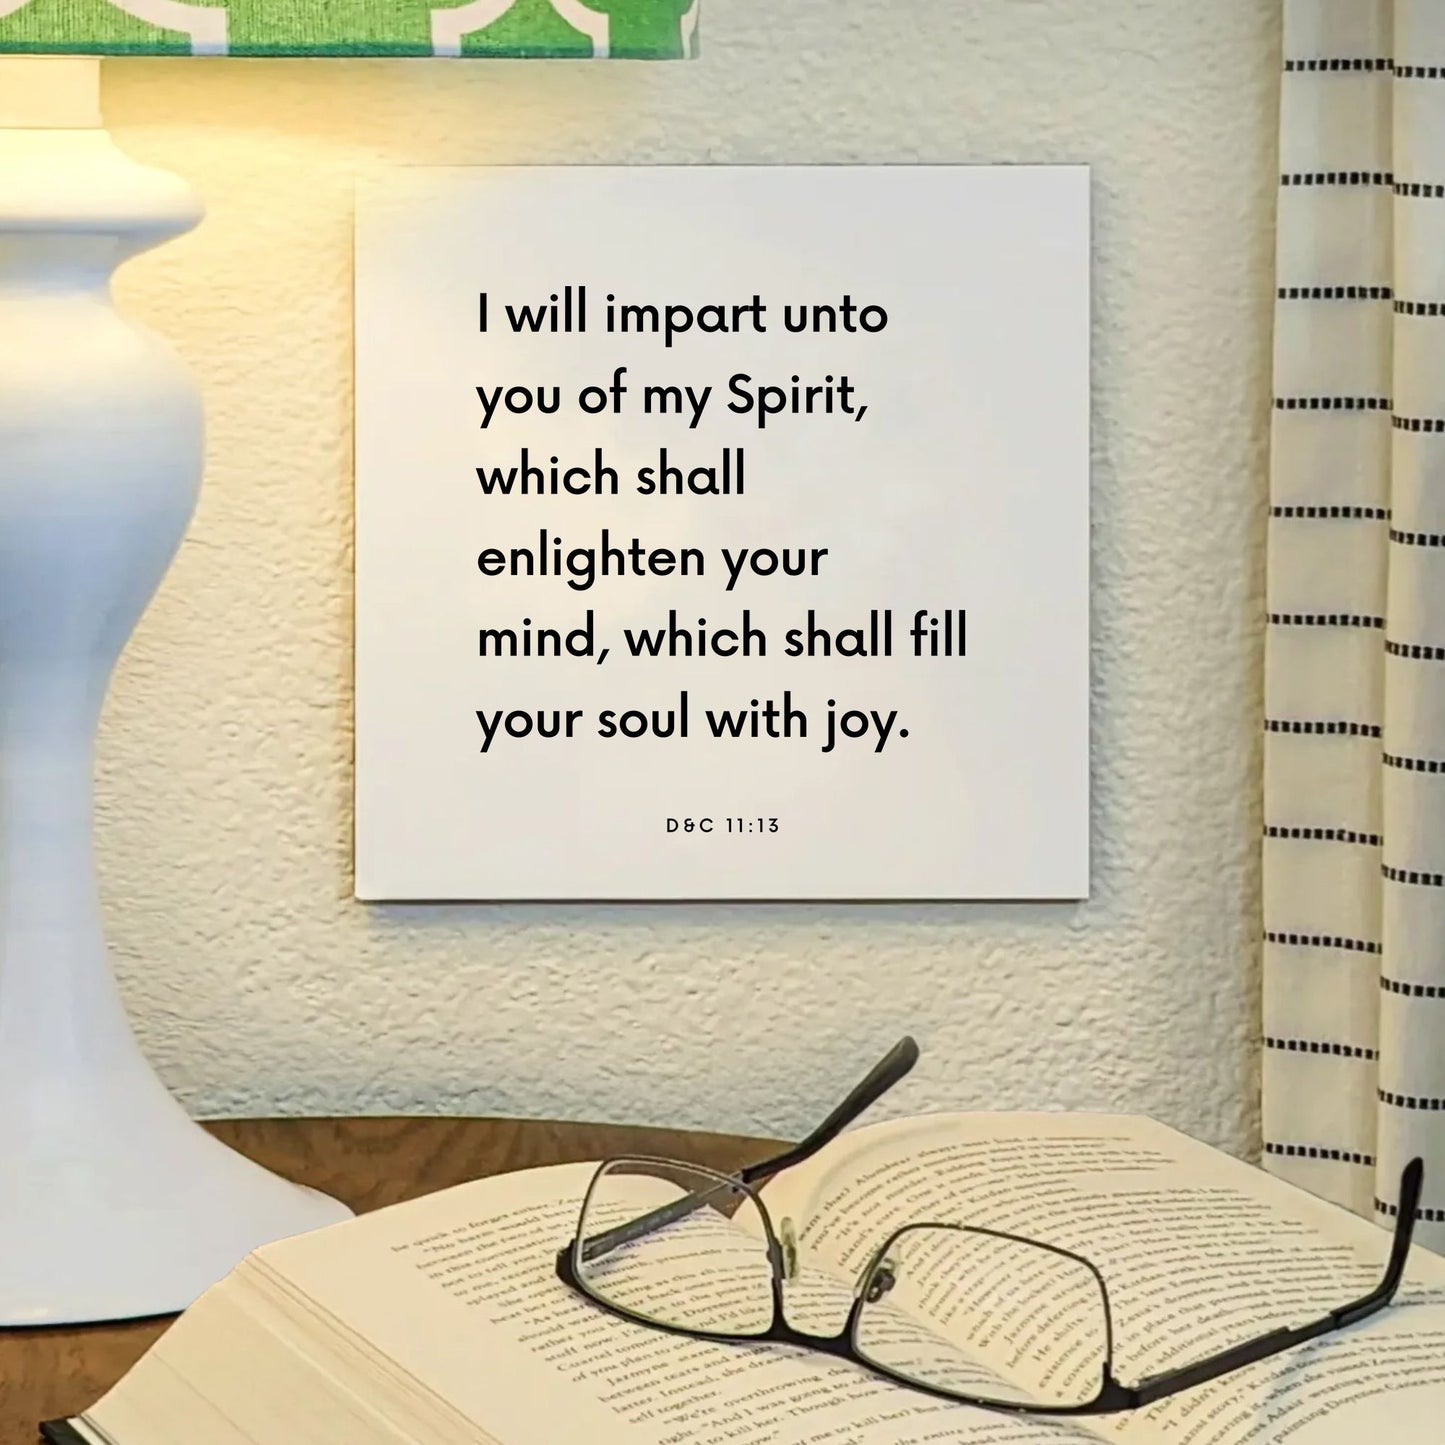 Lamp mouting of the scripture tile for D&C 11:13 - "I will impart unto you of my Spirit"